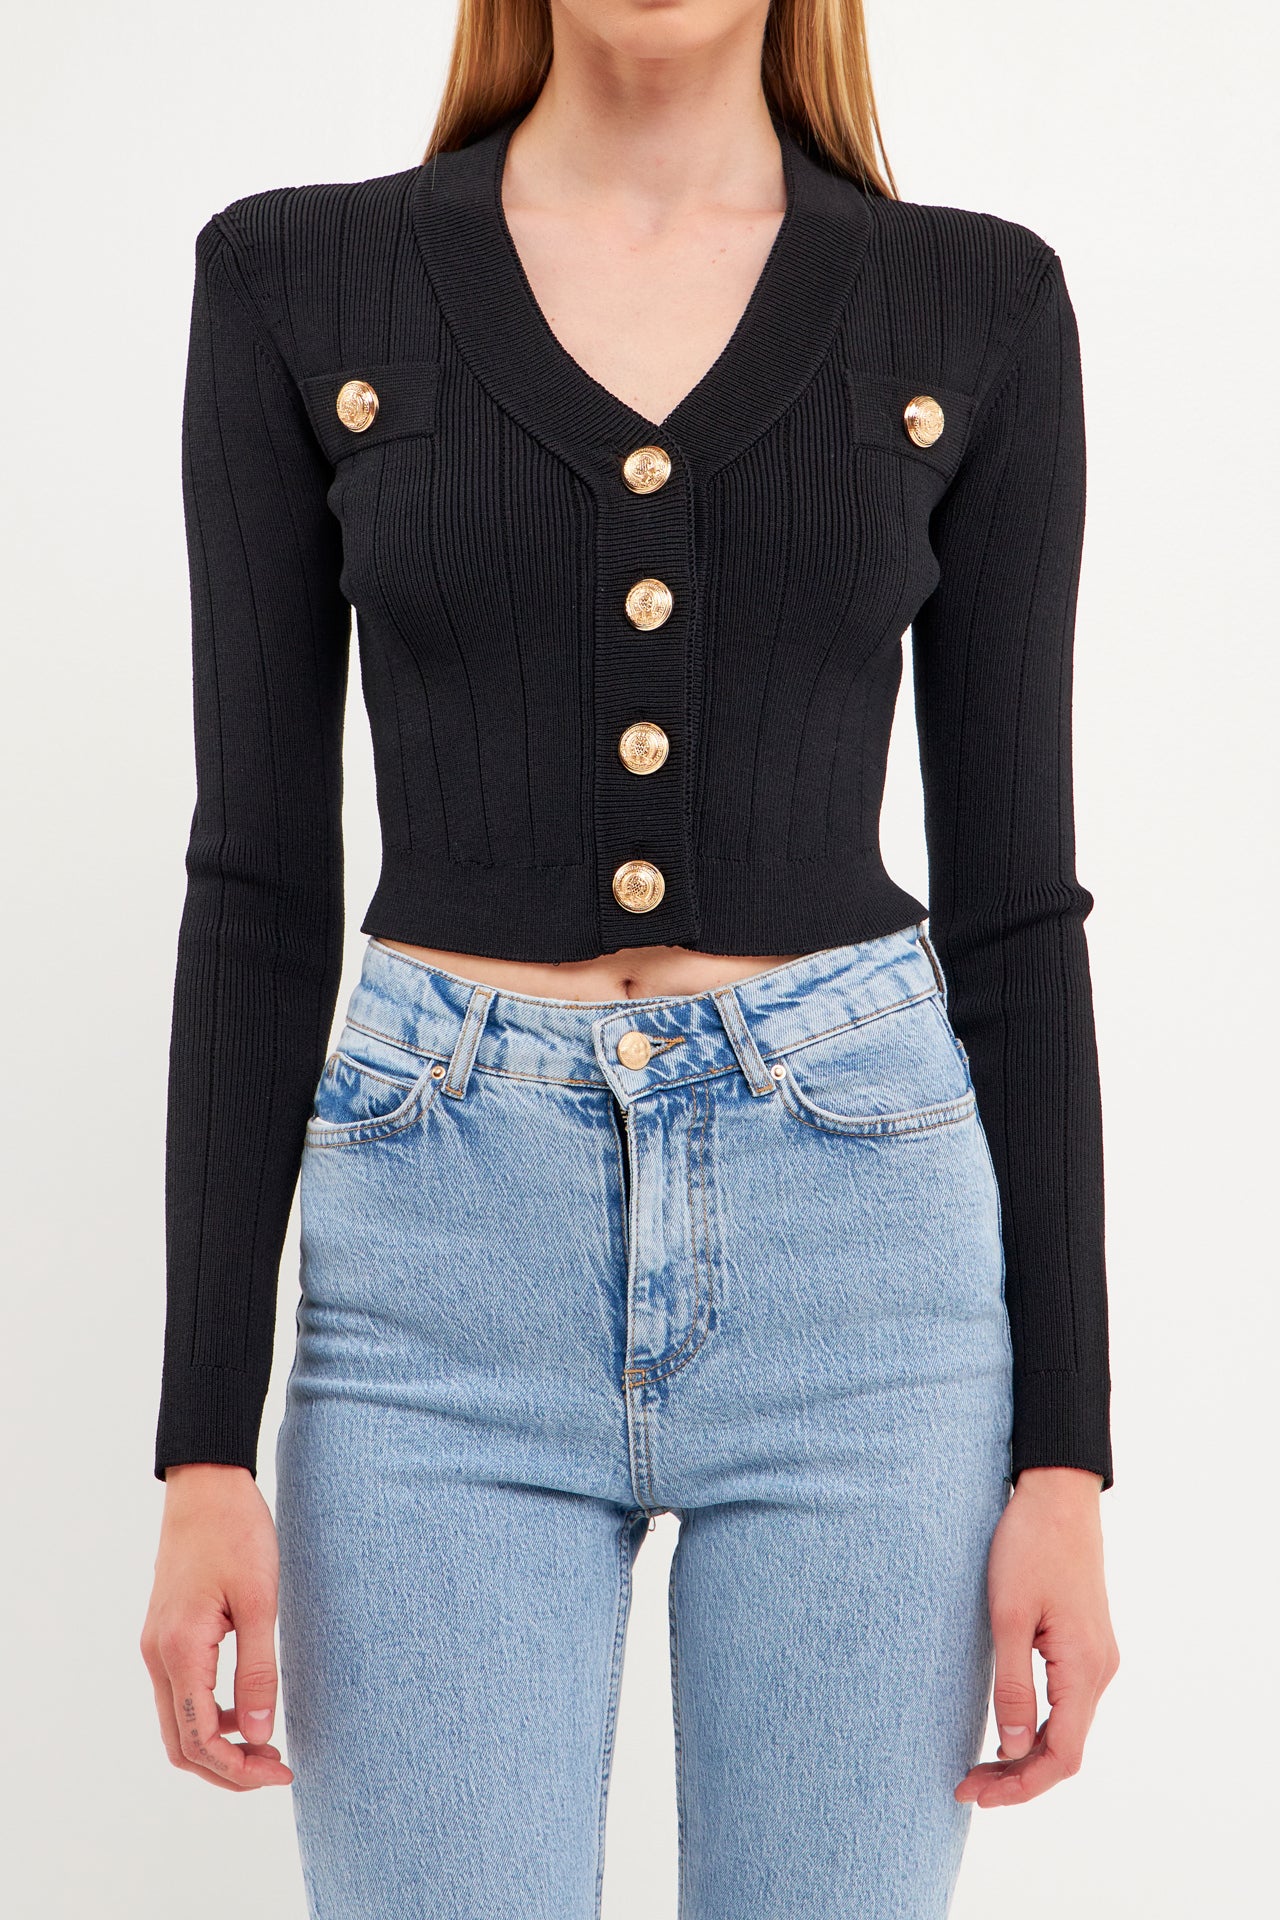 ENDLESS ROSE - NA Cropped Cardigan - SWEATERS & KNITS available at Objectrare